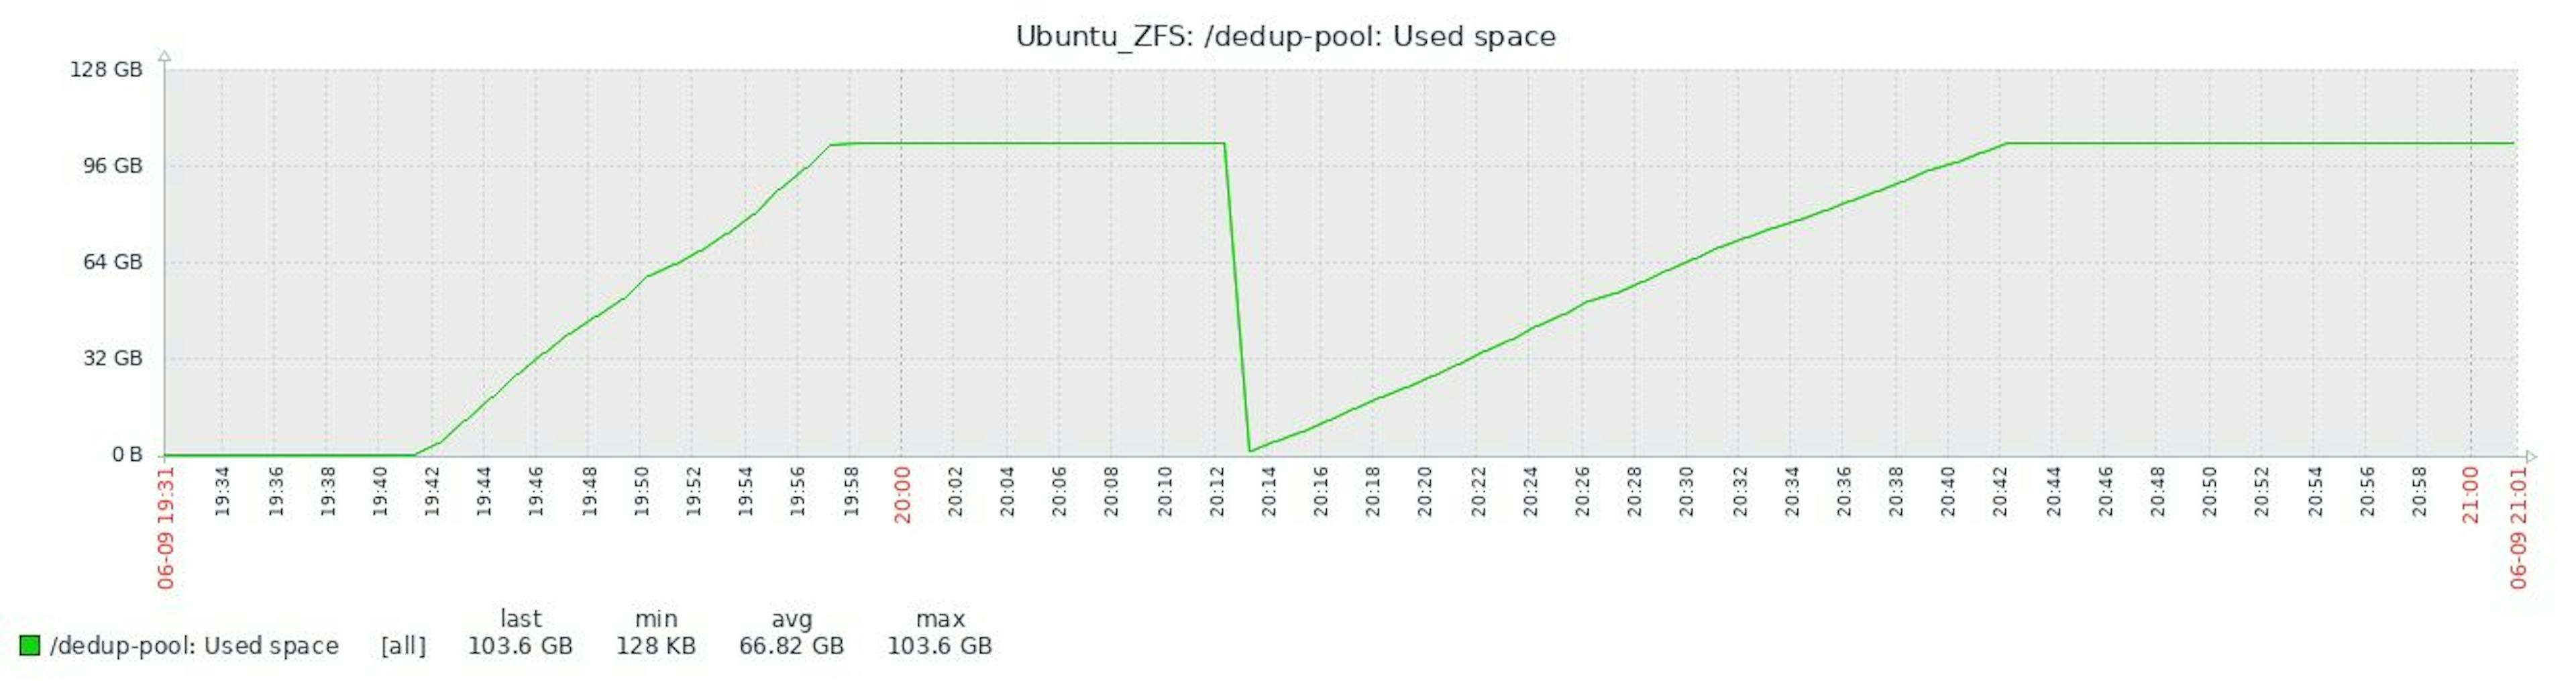 1.6.3 ZFS Used space